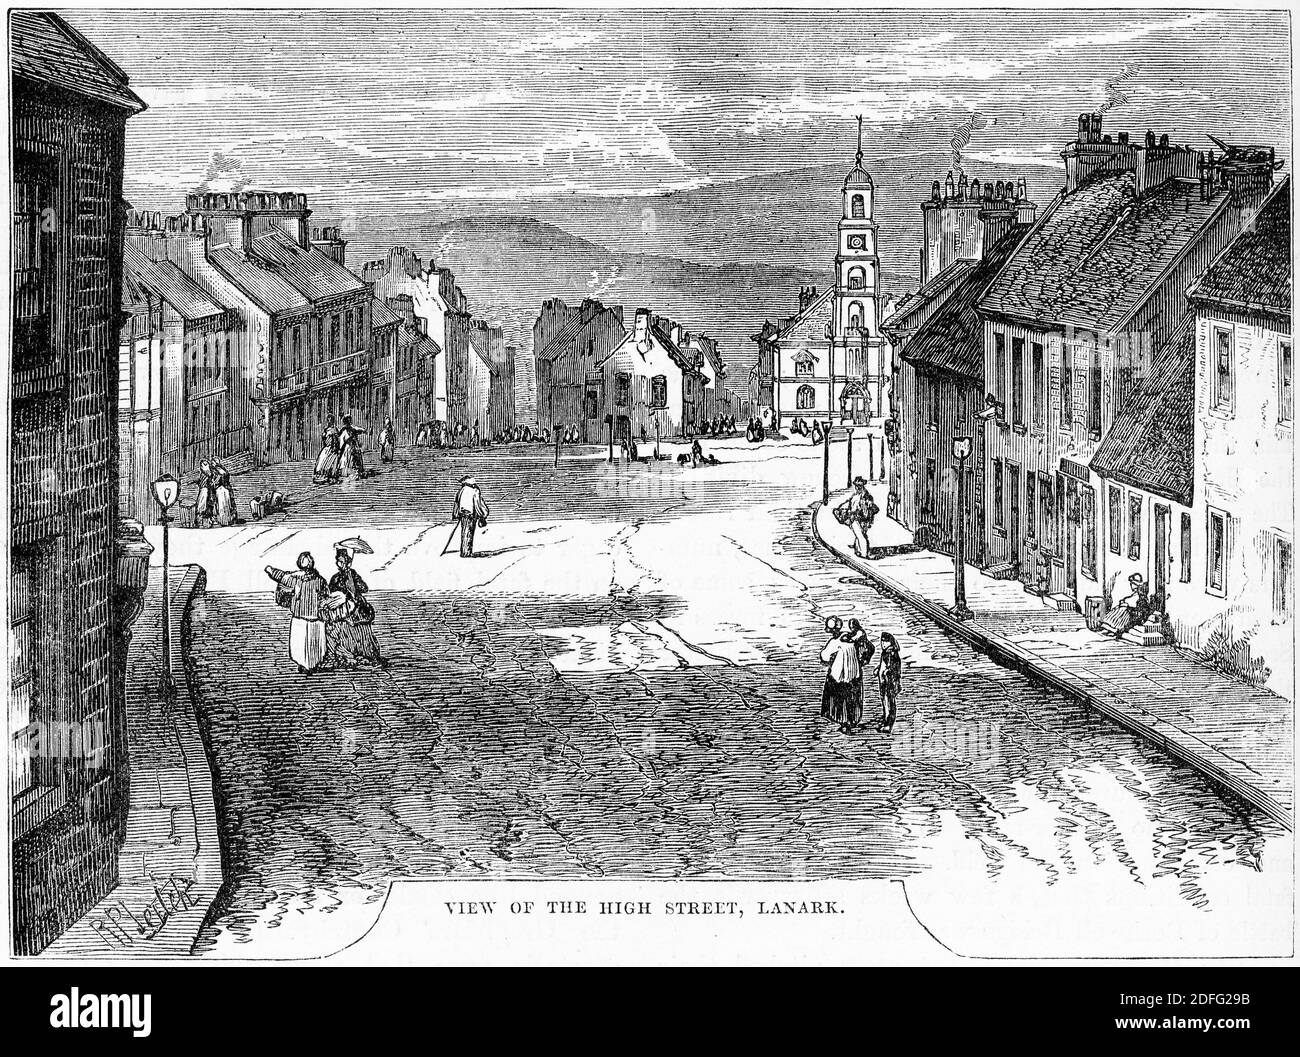 Engraving of High Street, Lanark, Scotland, circa 1650. Ilustration from 'The history of Protestantism' by James Aitken Wylie (1808-1890), pub. 1878 Stock Photo